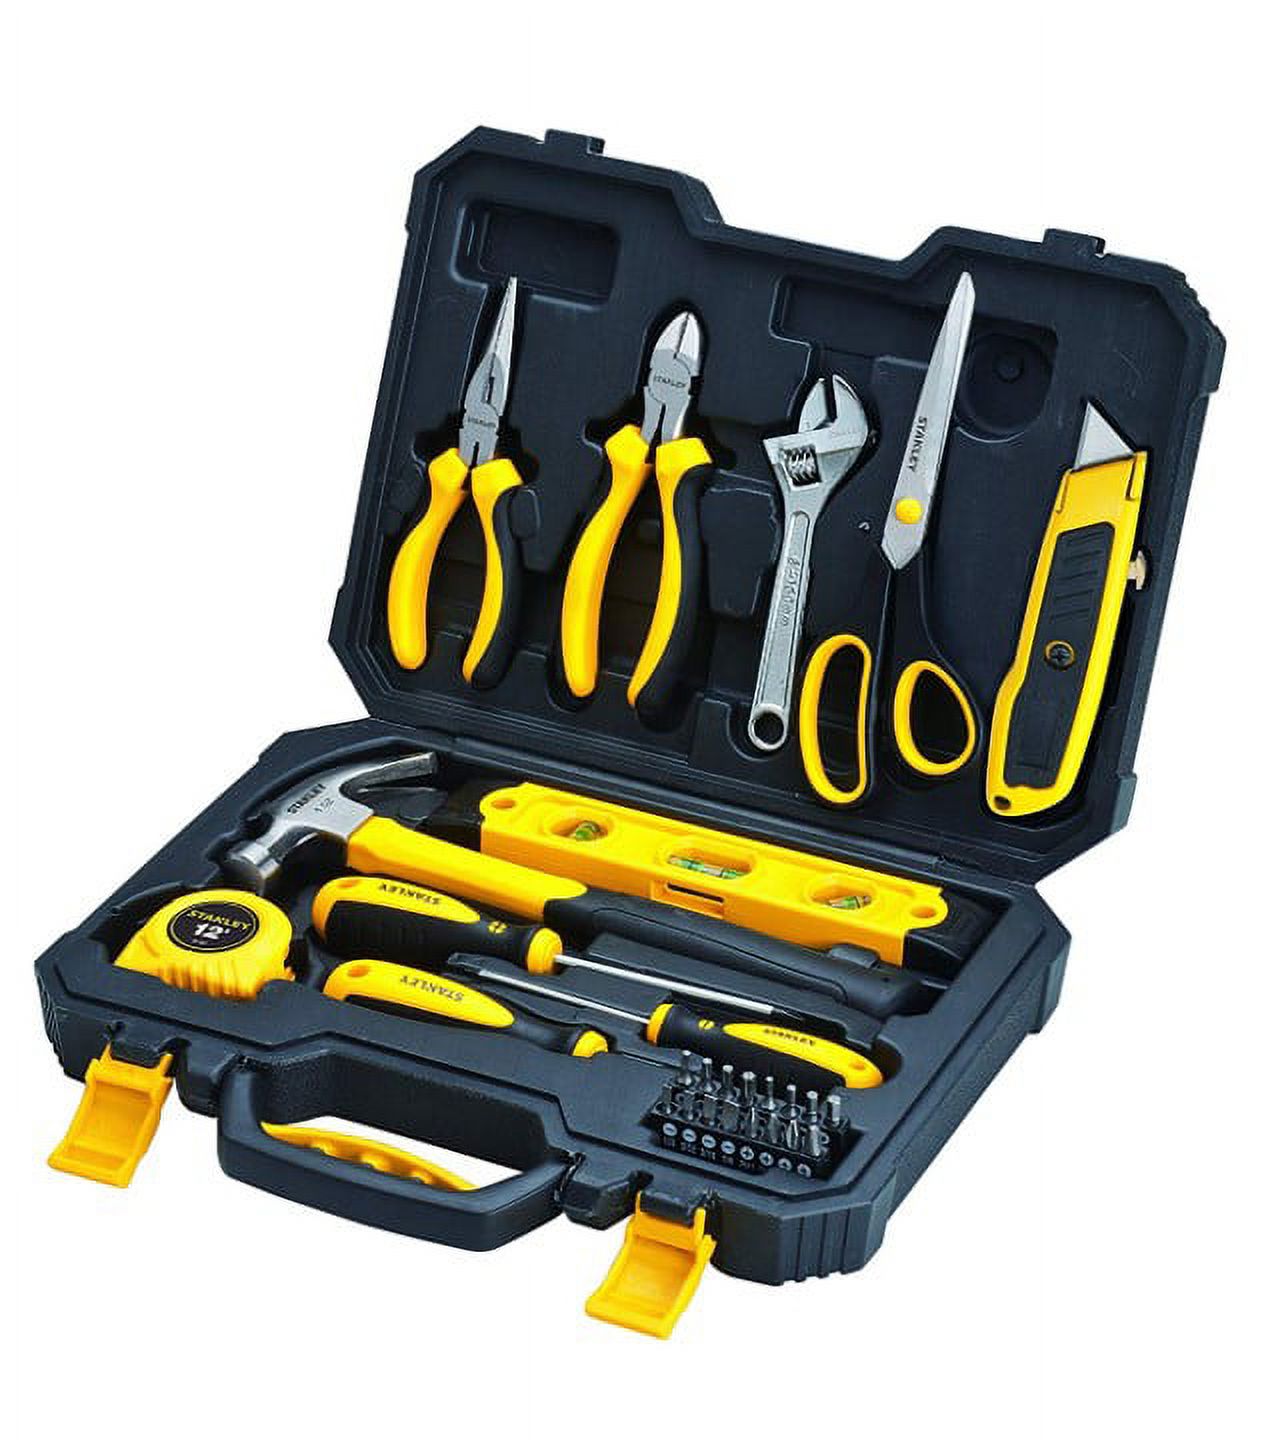 STANLEY 28 Piece Home Project Hand Tool Set, STHT75949 - image 1 of 3